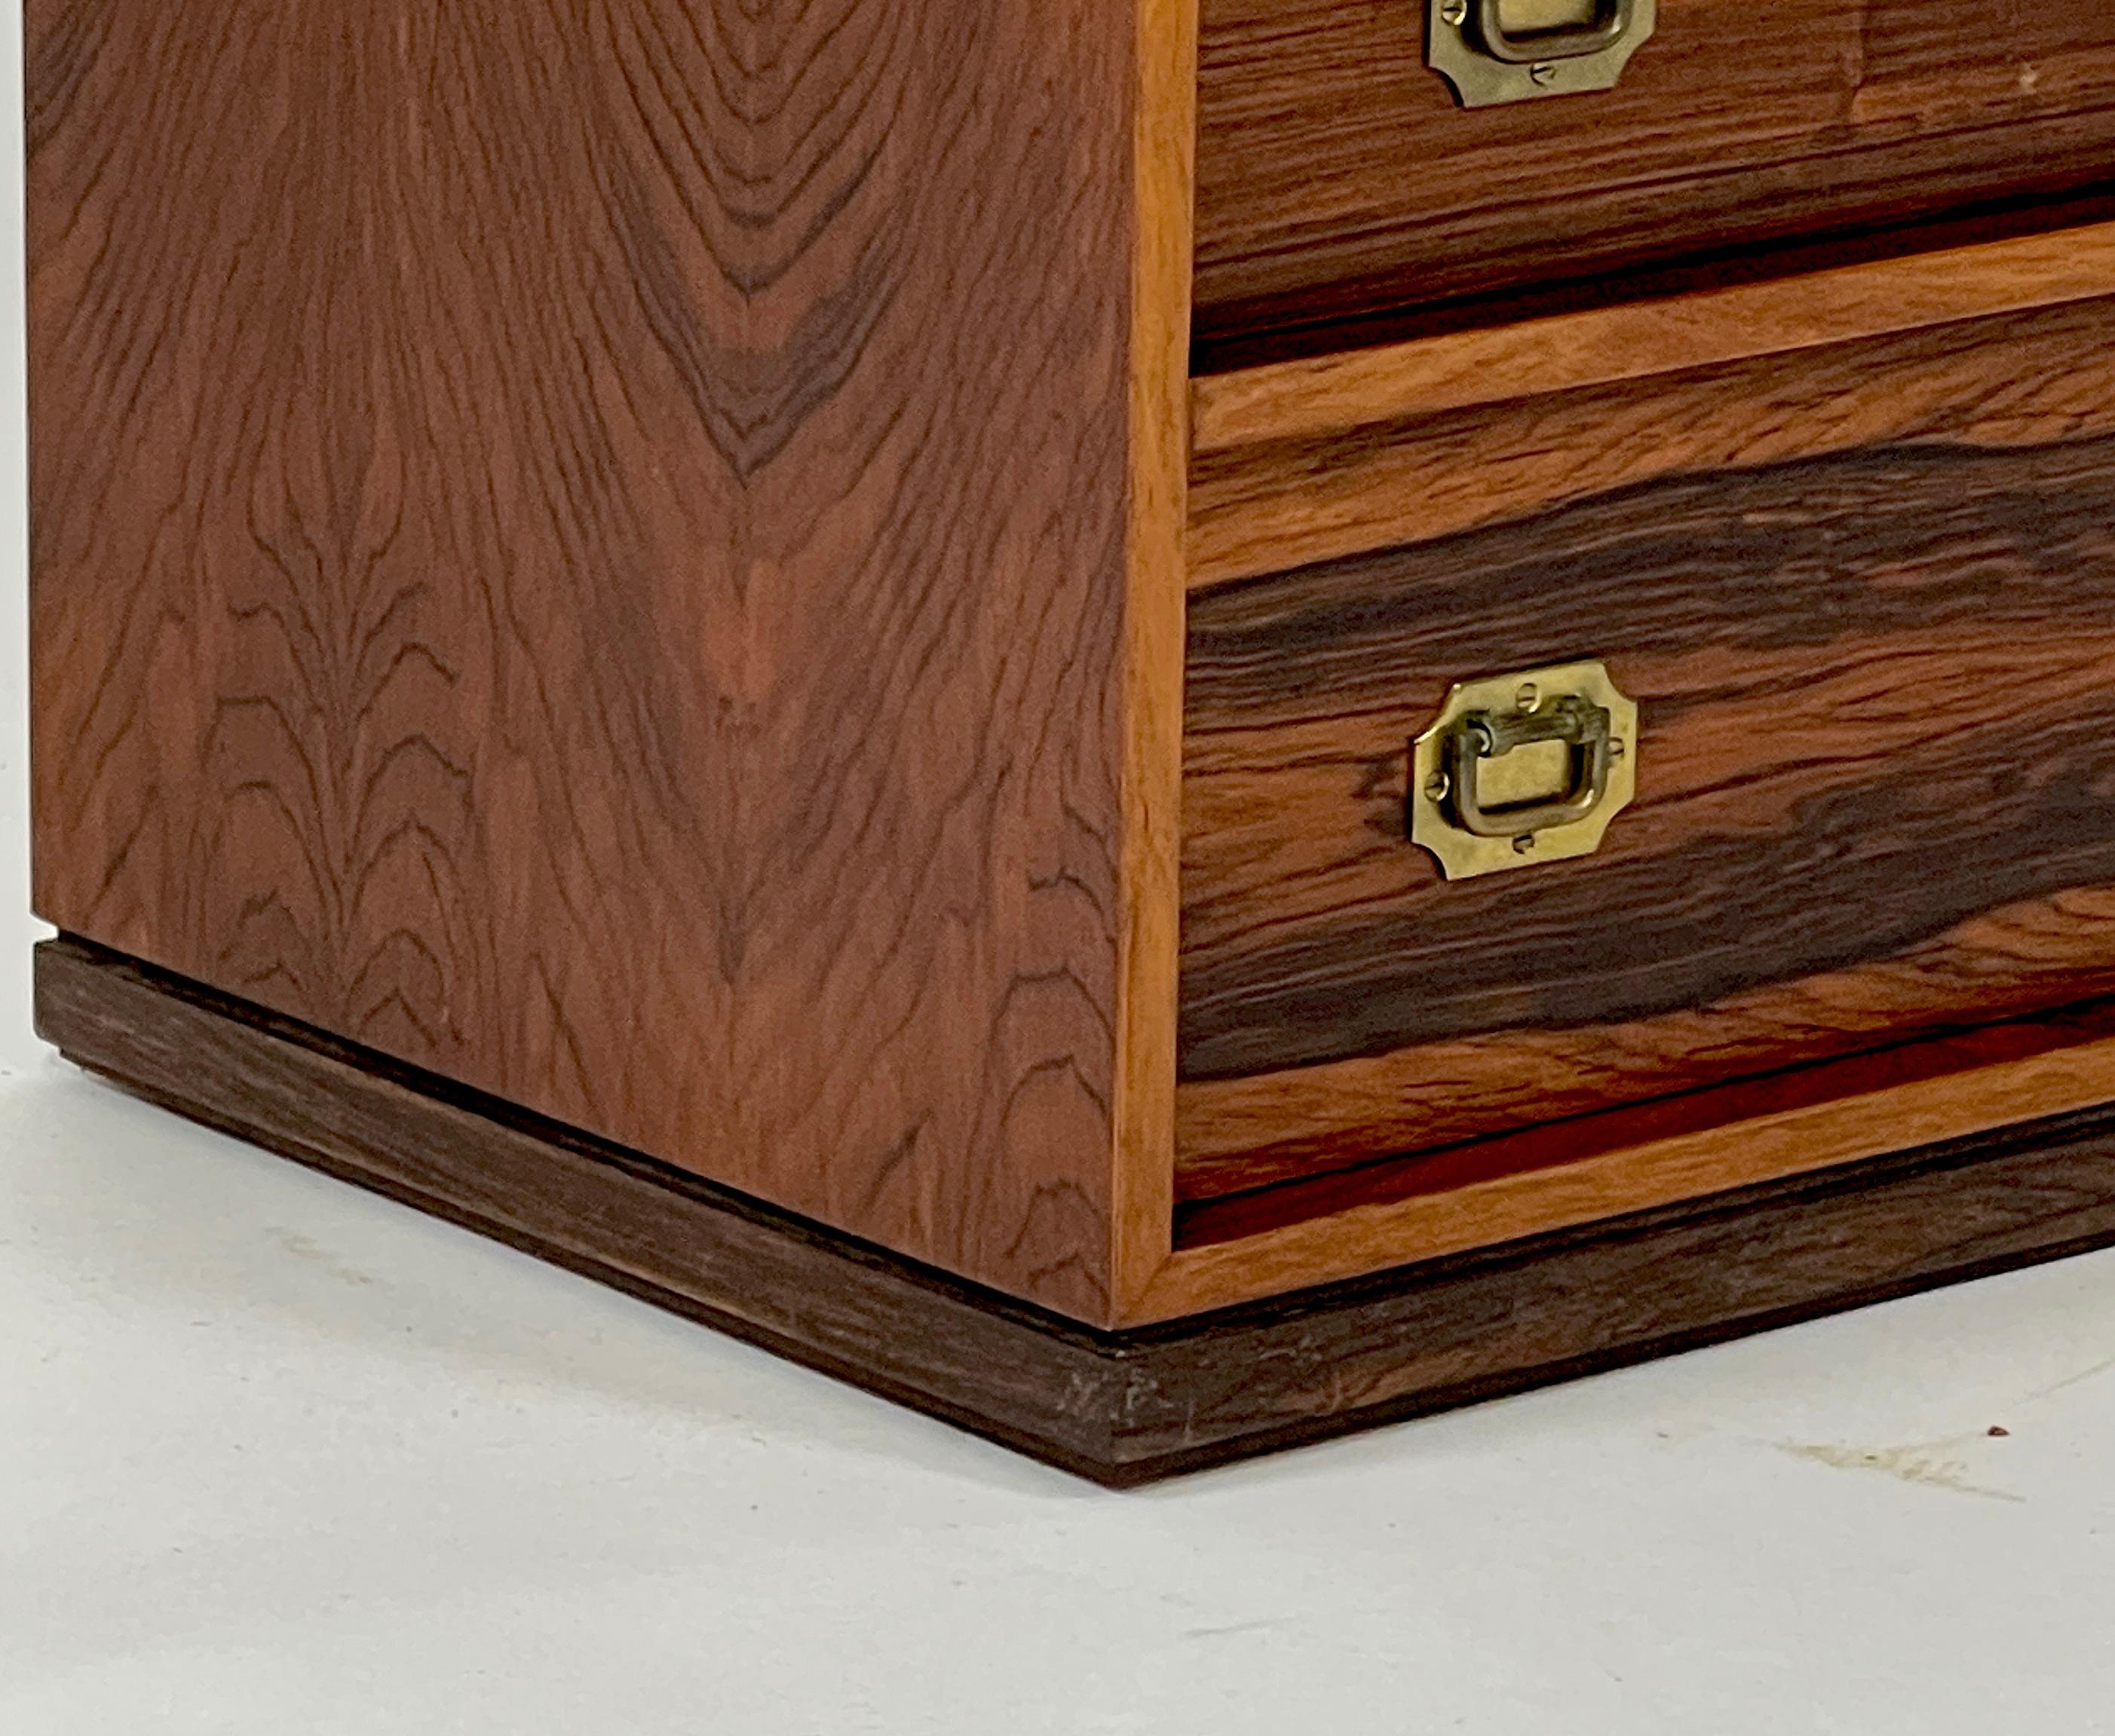 A beautiful petite rosewood campaign style jewelry chest designed by Henning Korch for Silkeborge Mobelfabrik. This particular piece has often been misattributed to Ole Wanscher in the past, but is actually by Henning Korch. The five drawers are